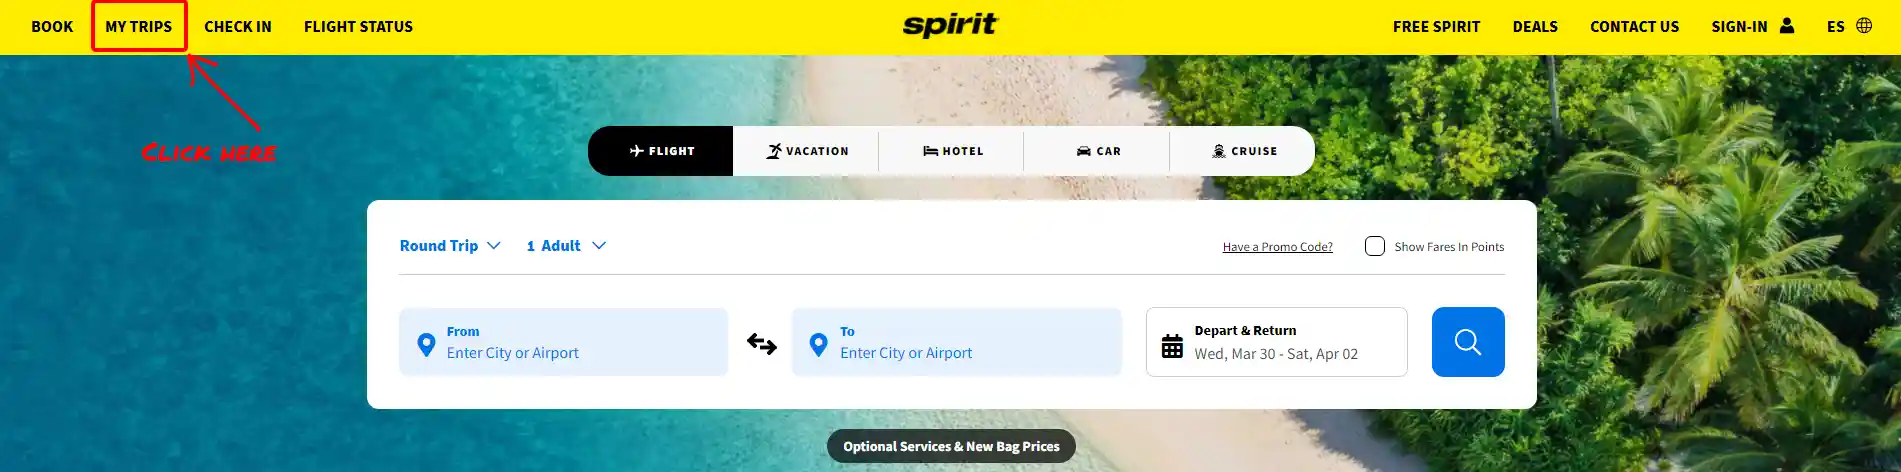 Spirit Airlines Manage My Trips